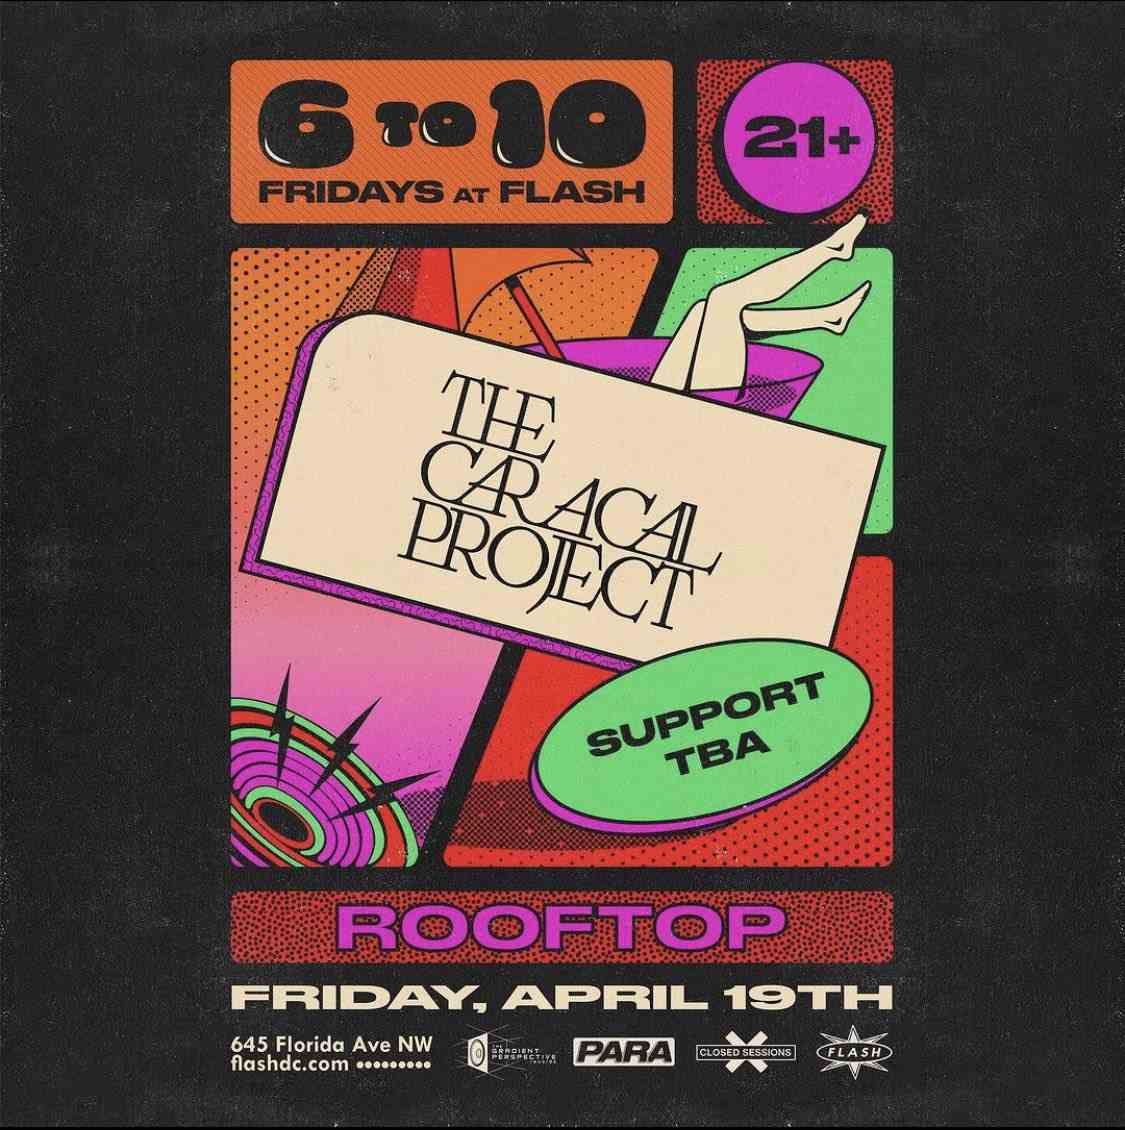 6to10: The Caracal Project (early show) event flyer